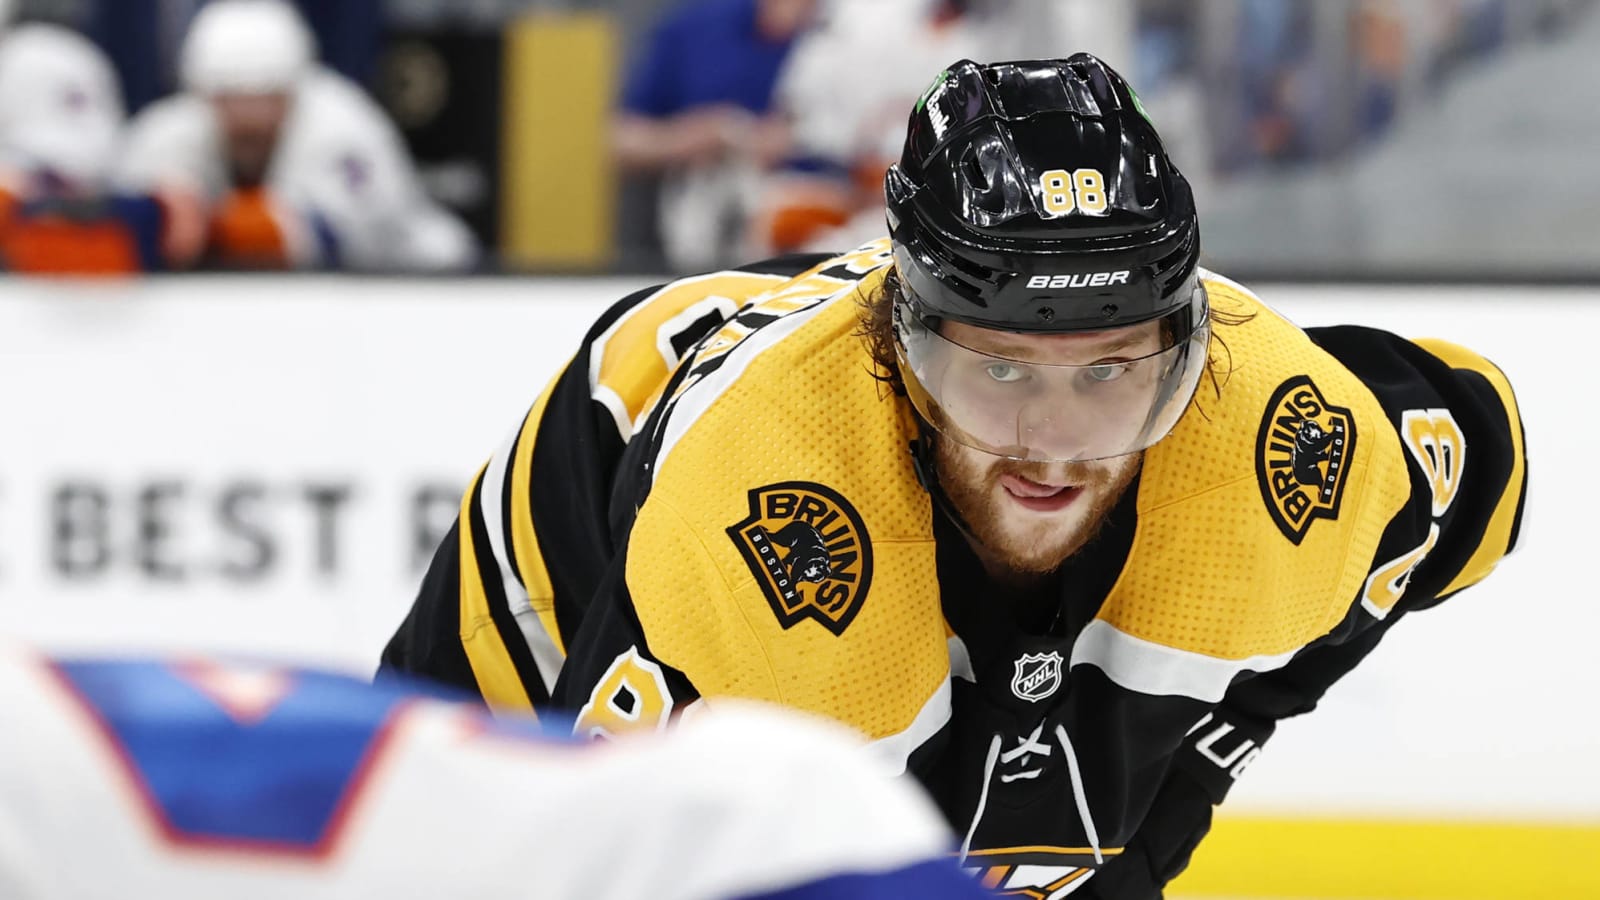 Watch: Bruins' David Pastrnak leads fans in chant at Czech soccer game